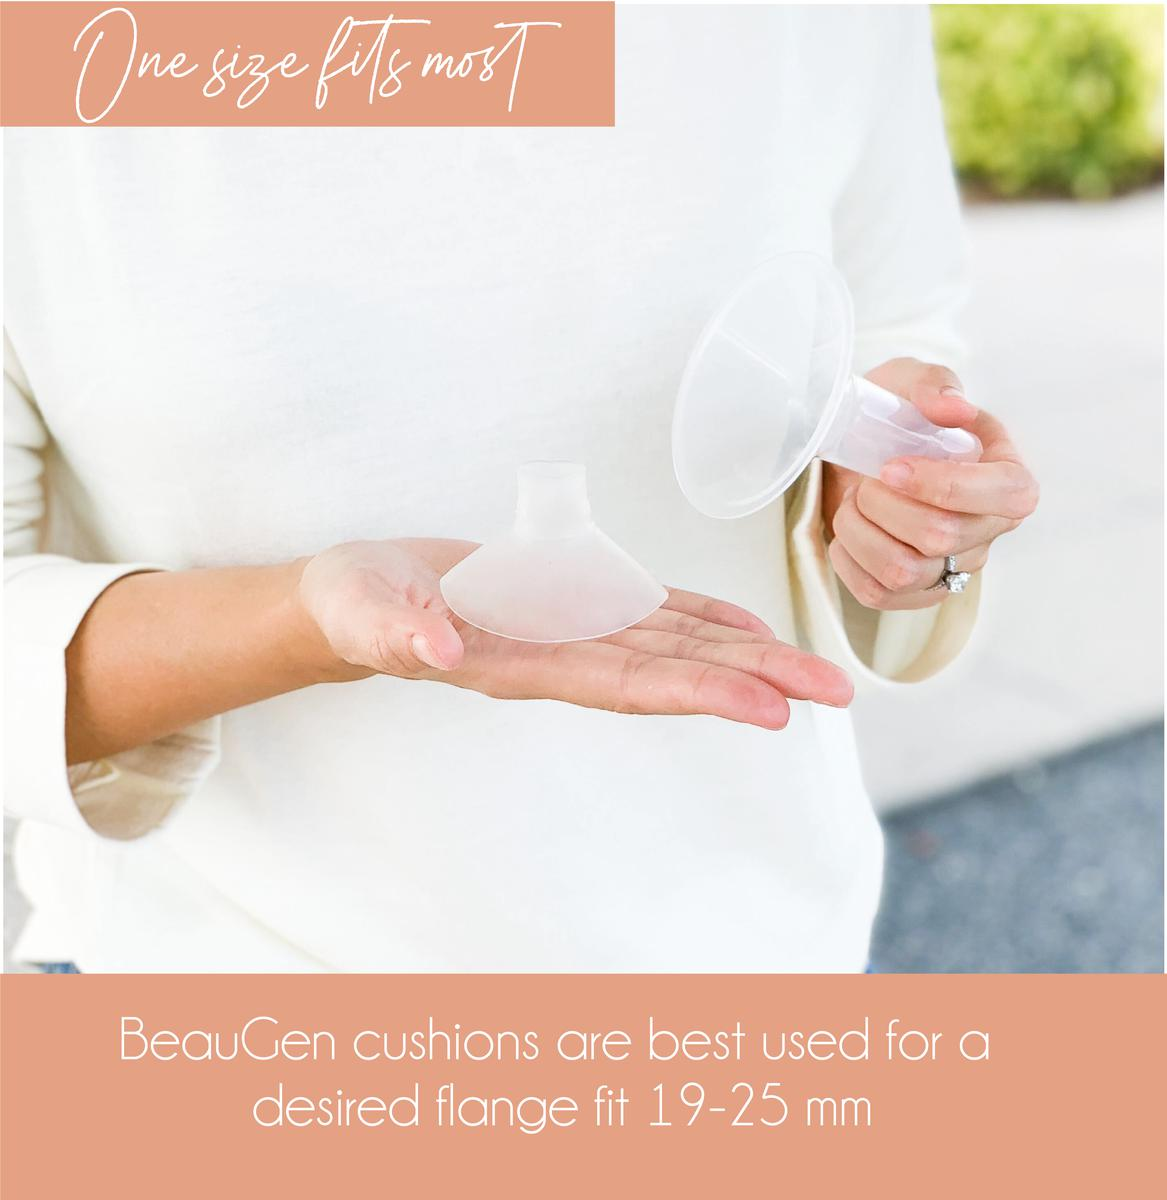 Take the pain out of pumping and get a better flange fit with the Clearly Comfy Cushions from BeauGen. Our Breast Pump Cushions are One Size Fits Mosts meaning you can use them to achieve a desired flange fit of 19 to 25mm.